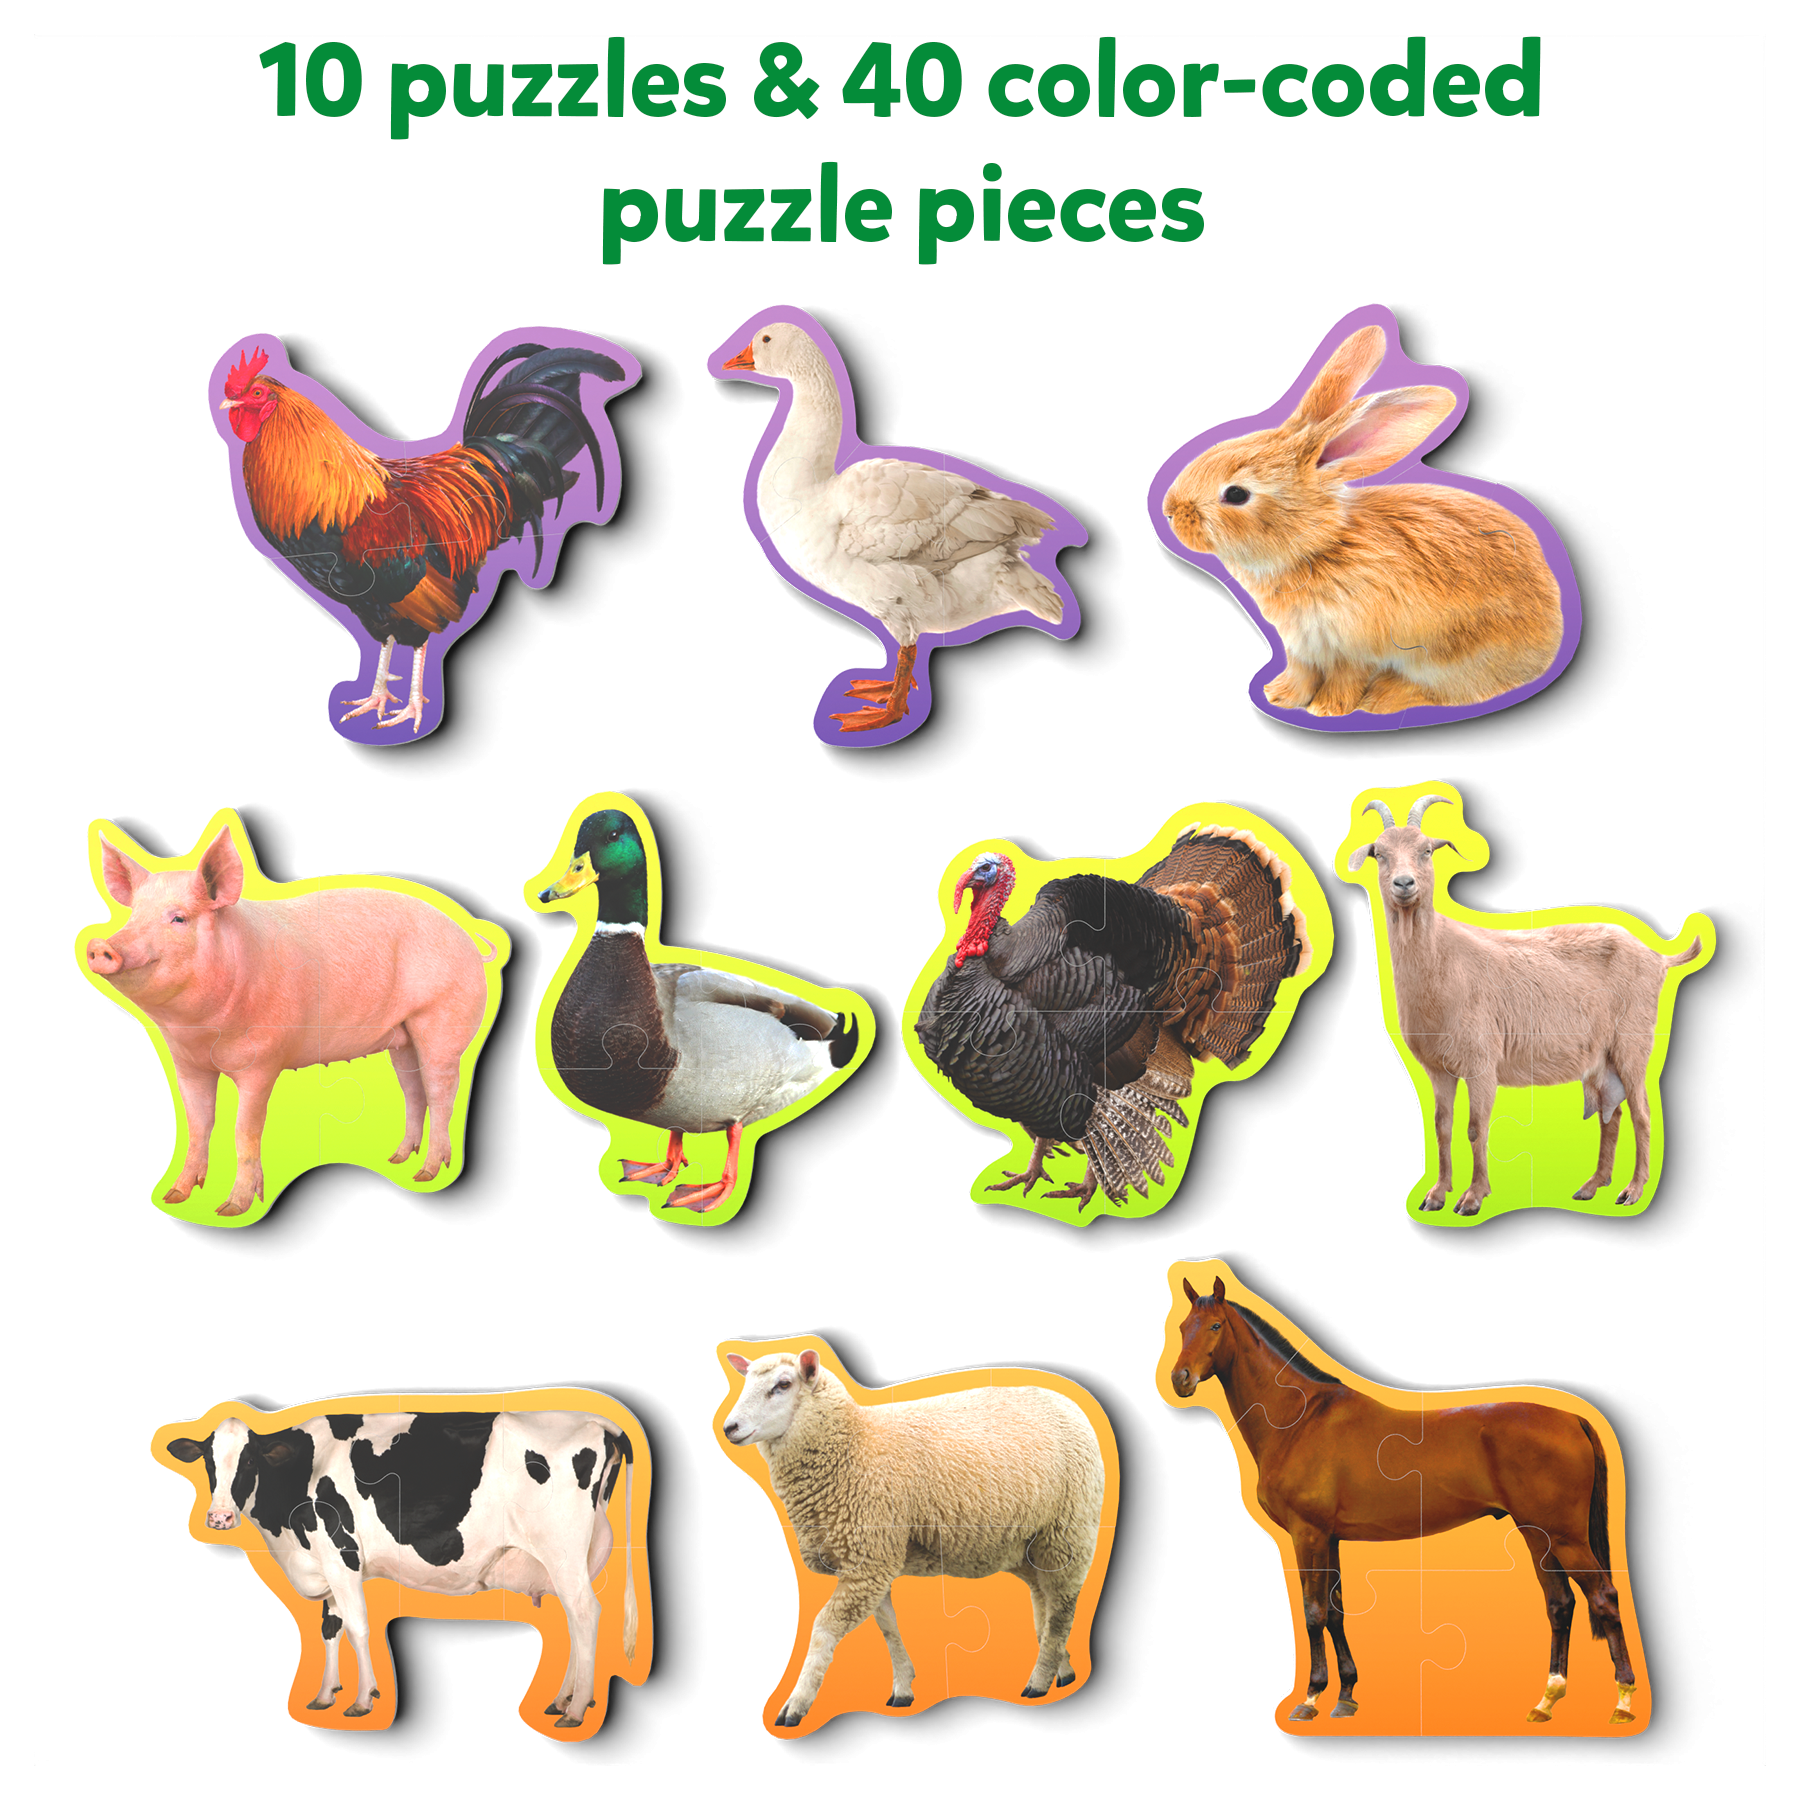 Skillmatics Step By Step Puzzle - 40 Piece Farm Animal Jigsaw Puzzle, Educational Toddler Toy, Stage-Based Learning, Gifts For Kids Ages 2 To 5